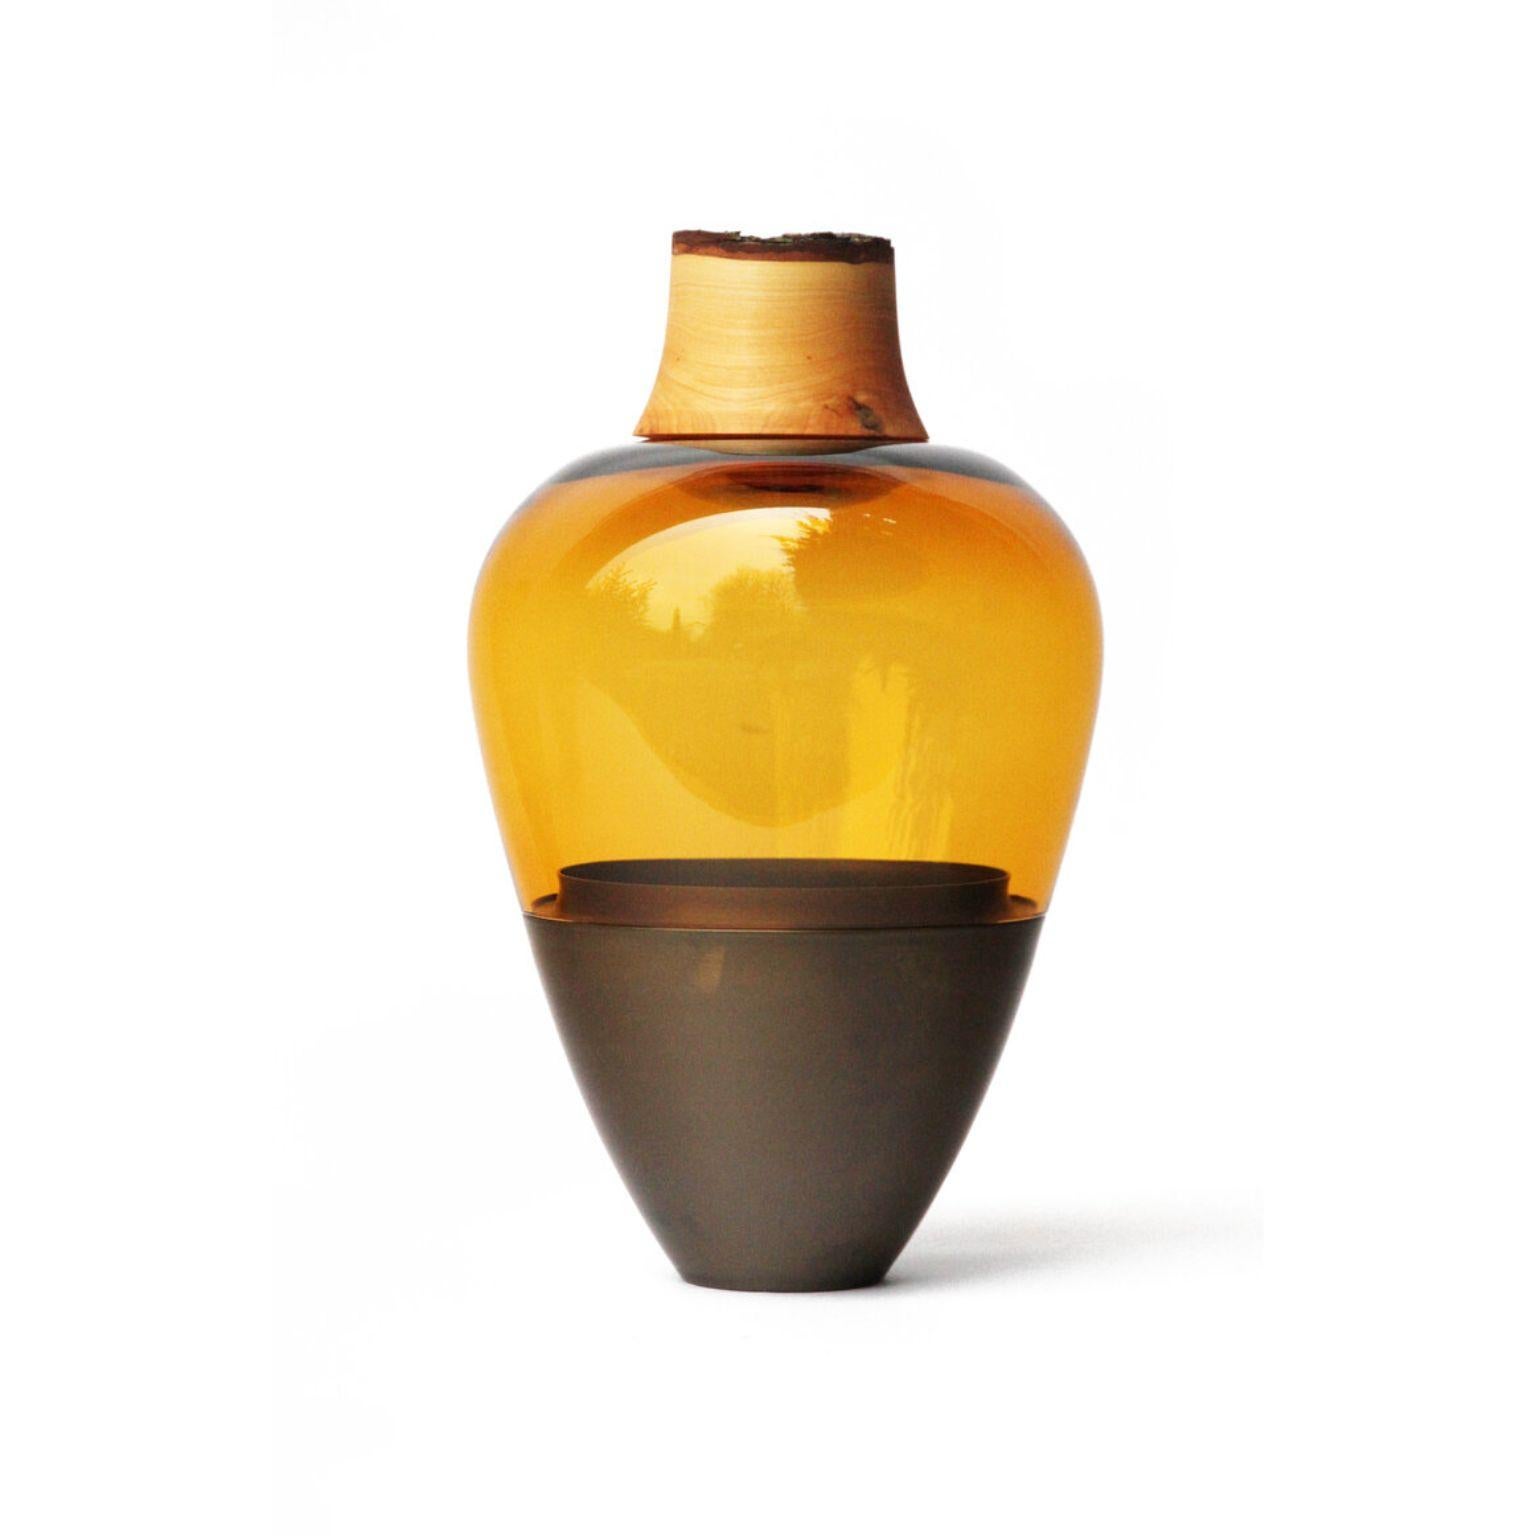 Amber and Patinated Brass Sculpted Blown Glass India Vessel, Pia Wüstenberg
Dimensions: height 20 x diameter 38 cm.
Materials: hand blown glass, brass.

Pia Wüstenberg, Utopia
Pia Wüstenberg is a creative with a passion for materials and craft. She